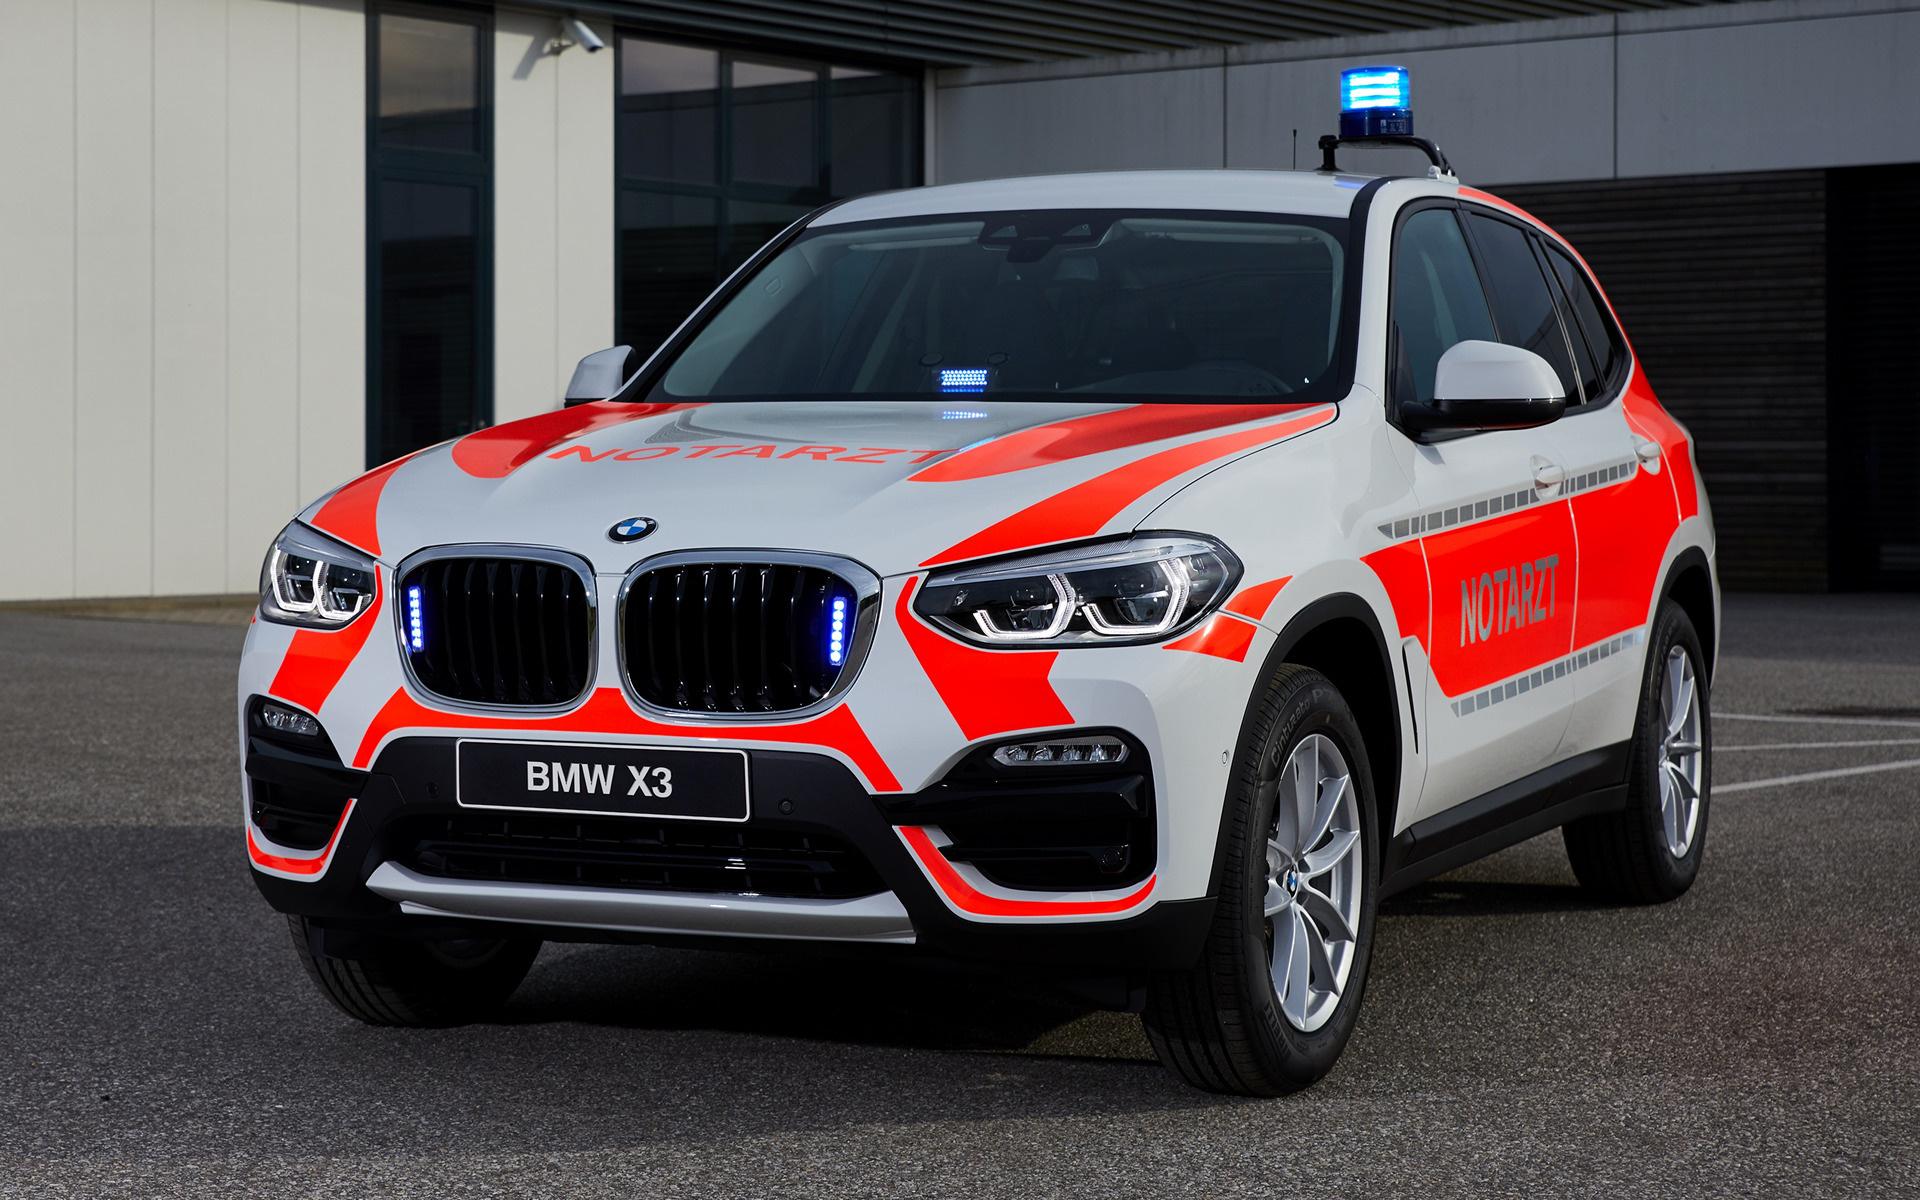 BMW X3 Notarzt and HD Image